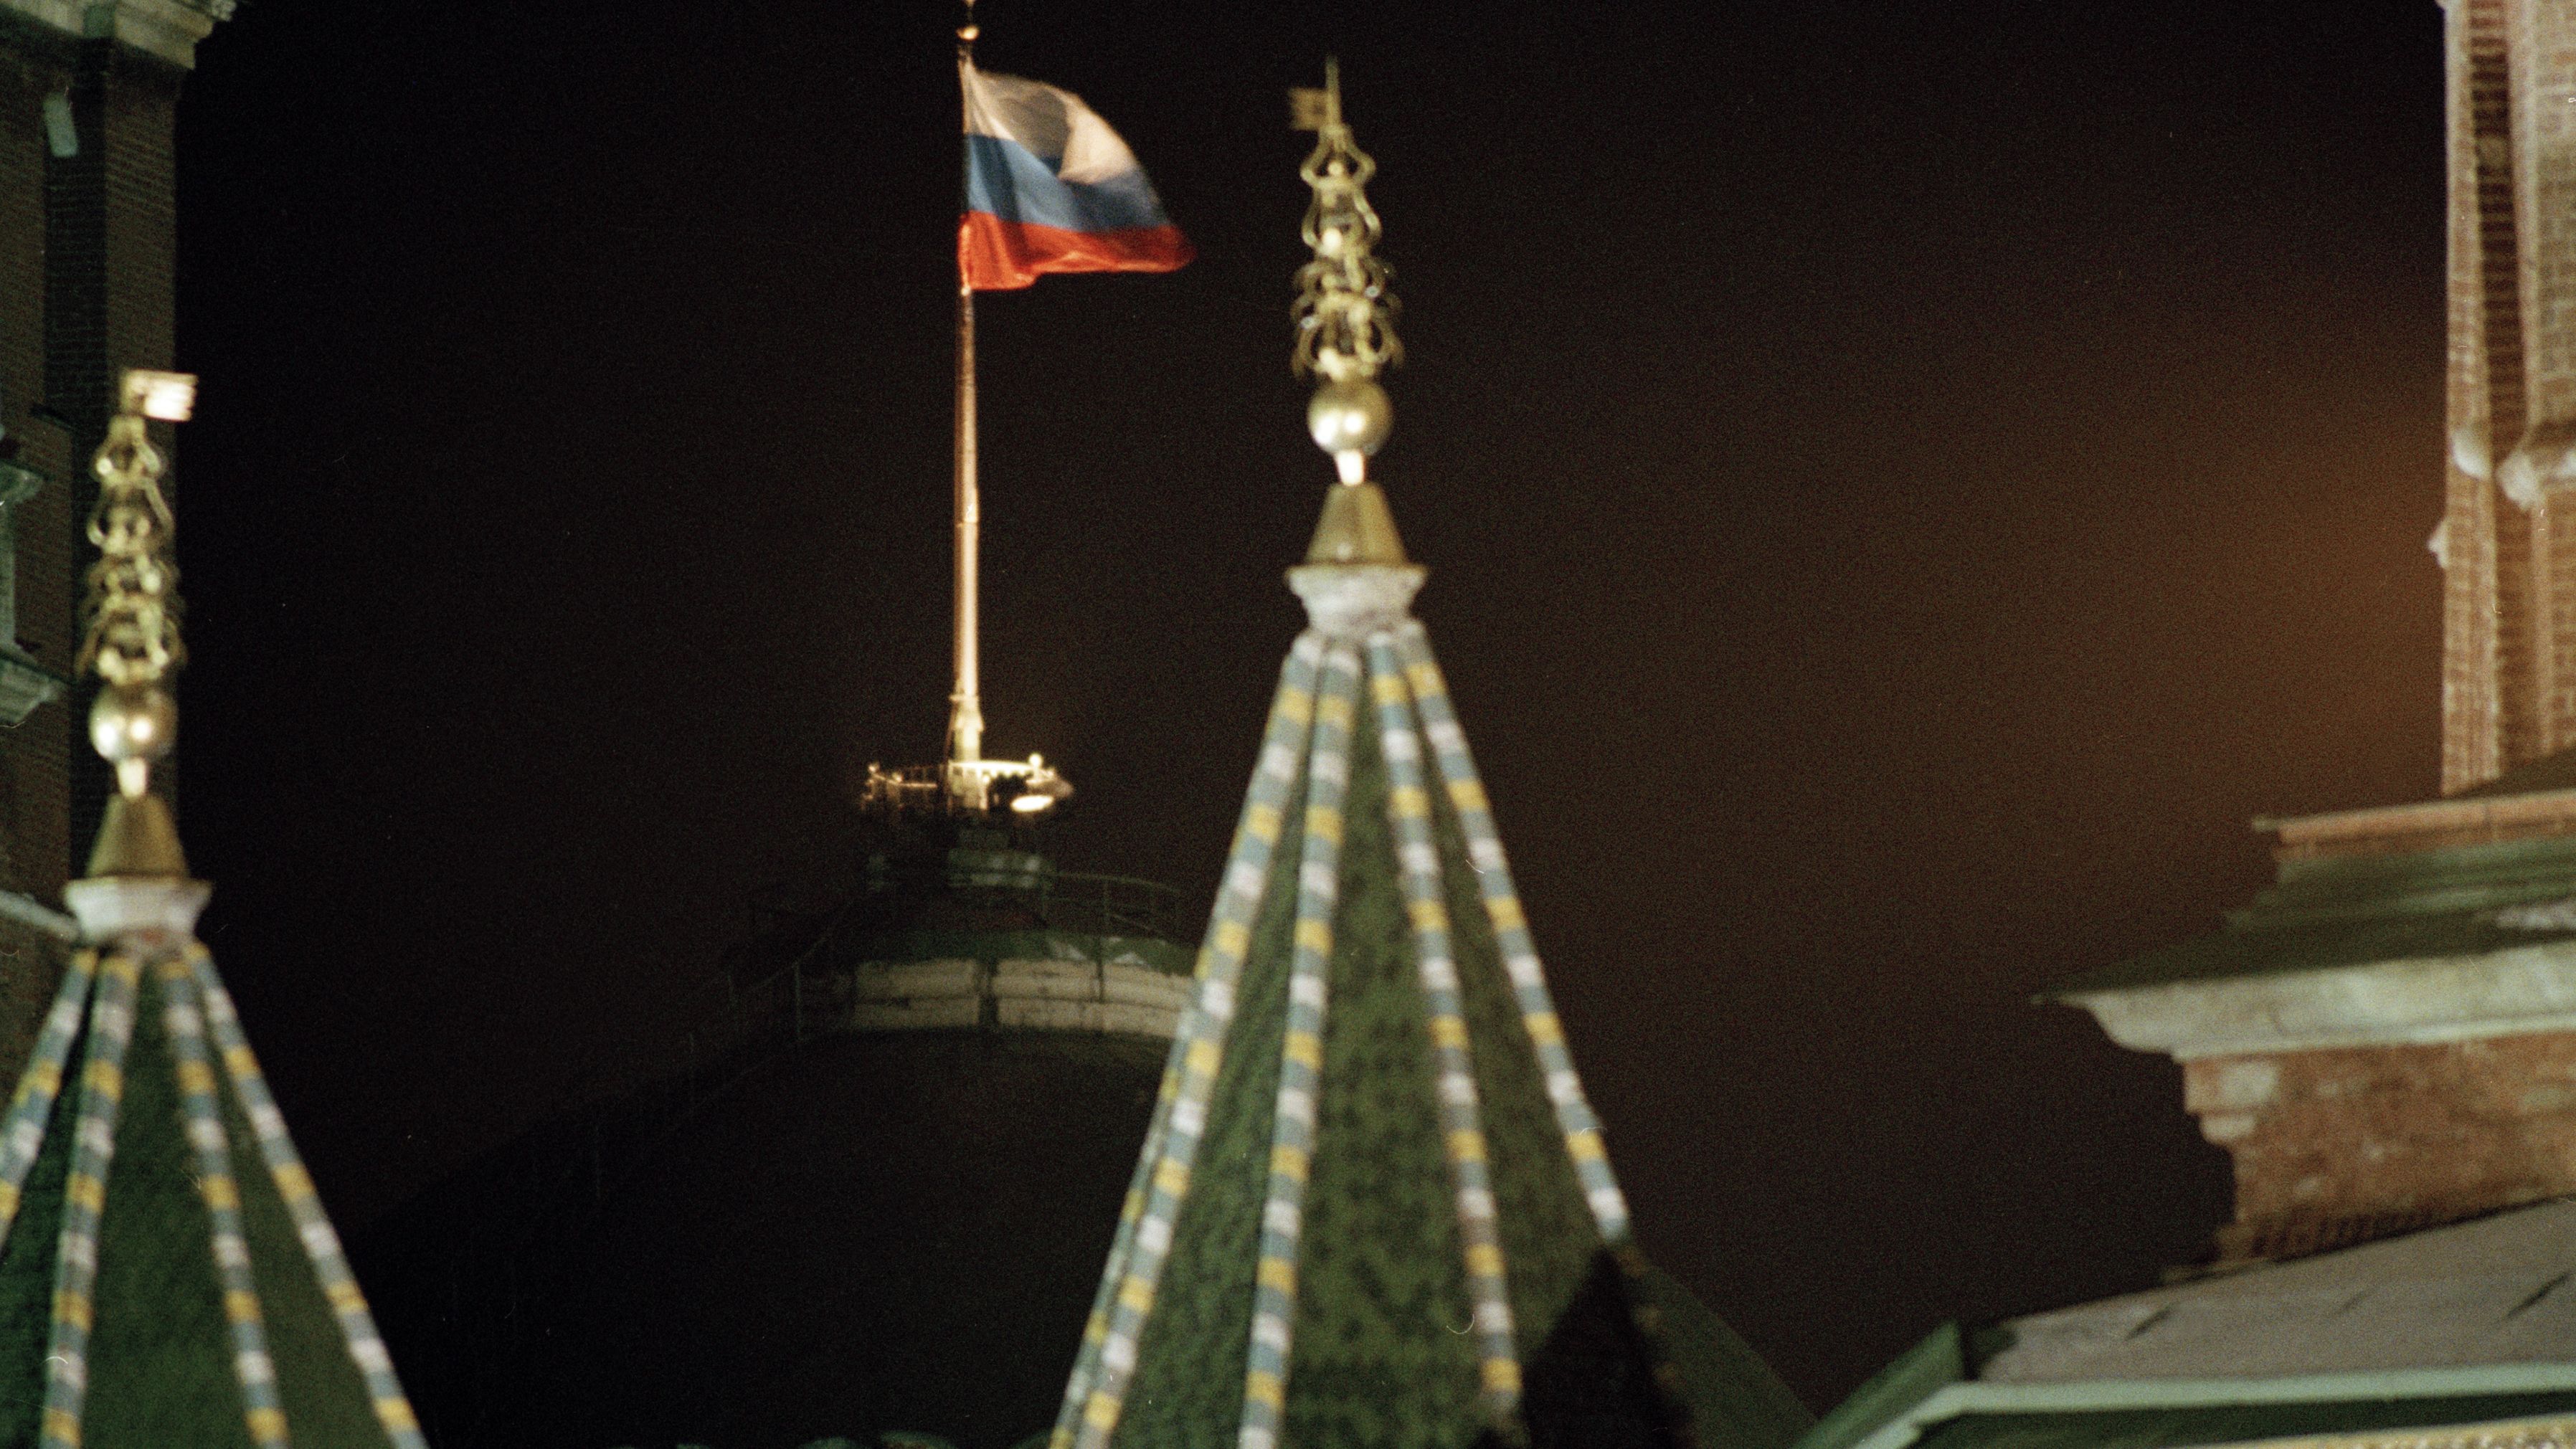 The Russian flag flies over the Kremlin shortly after Gorbachev resigned. The red Communist flag bearing the gold hammer and sickle emblem that fluttered over the Kremlin came down in a final act that underscored the fall of the Soviet Union -- and the end of the Cold War.